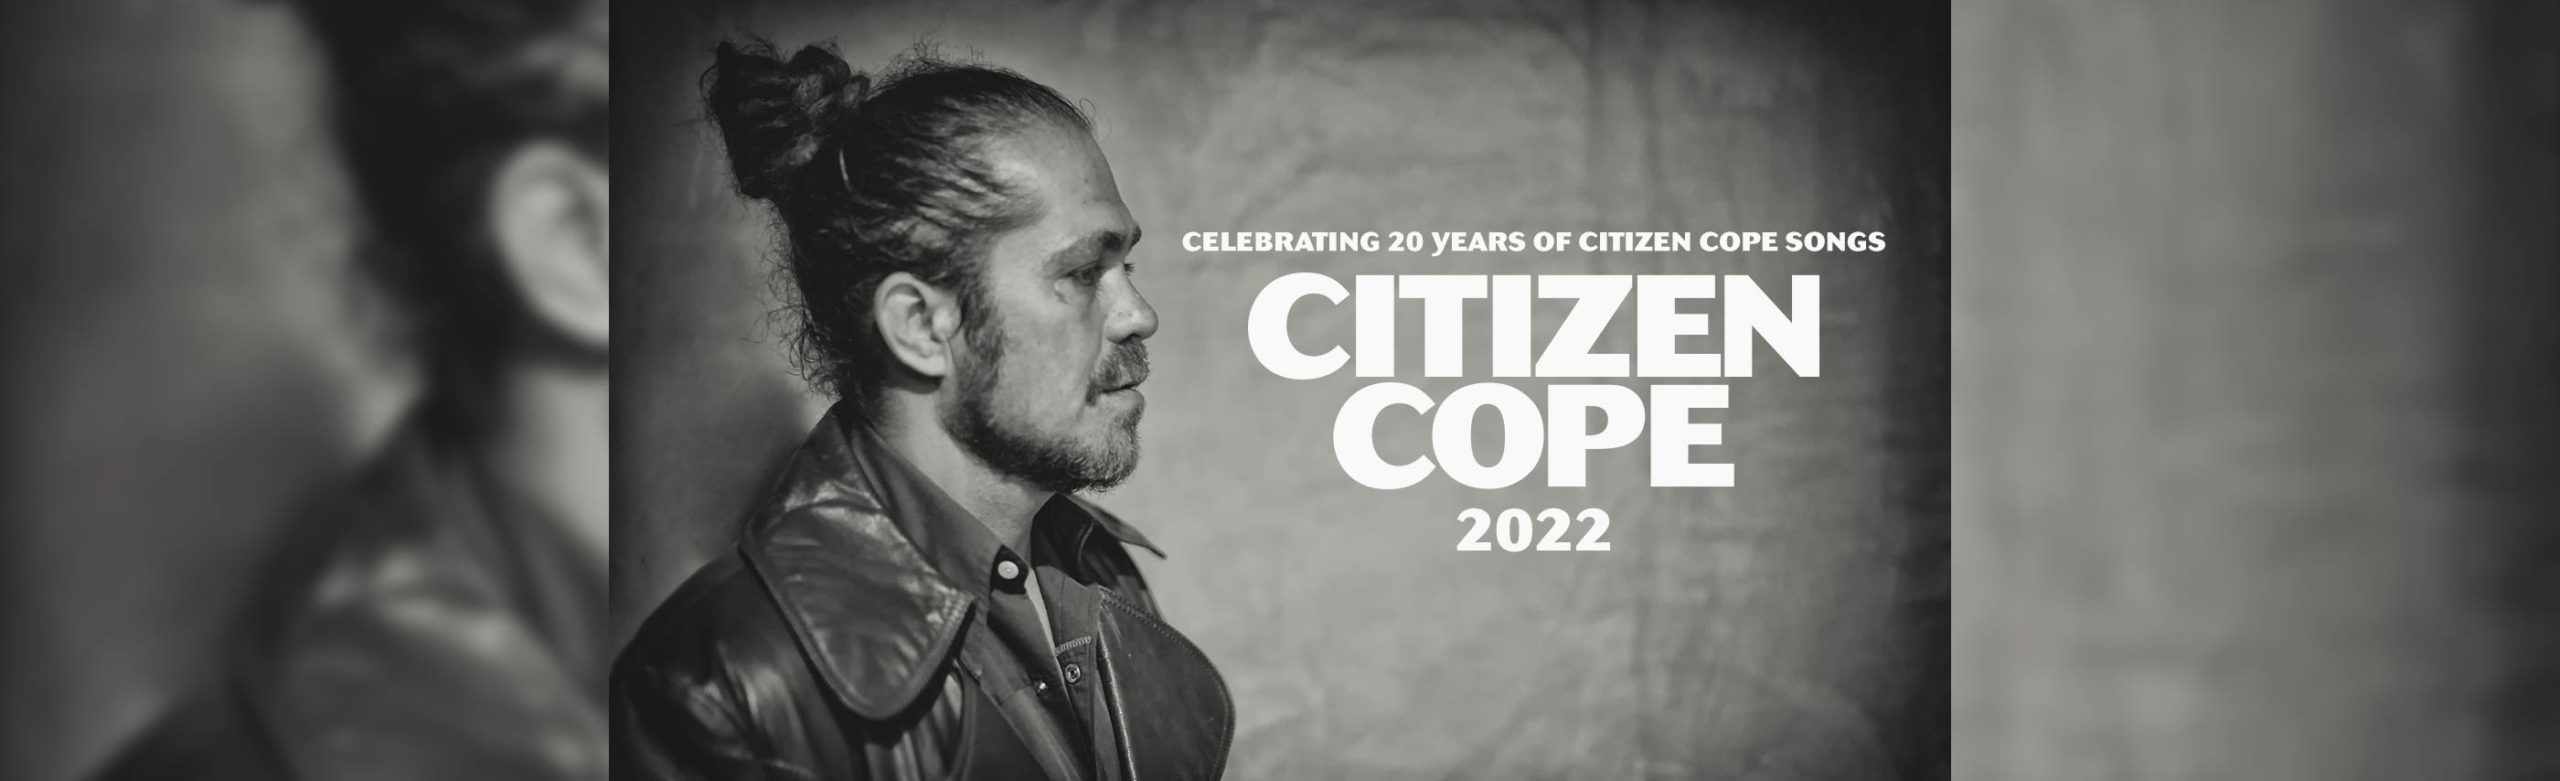 Citizen Cope Announces 2022 Anniversary Tour with Shows in Bozeman and Missoula Image